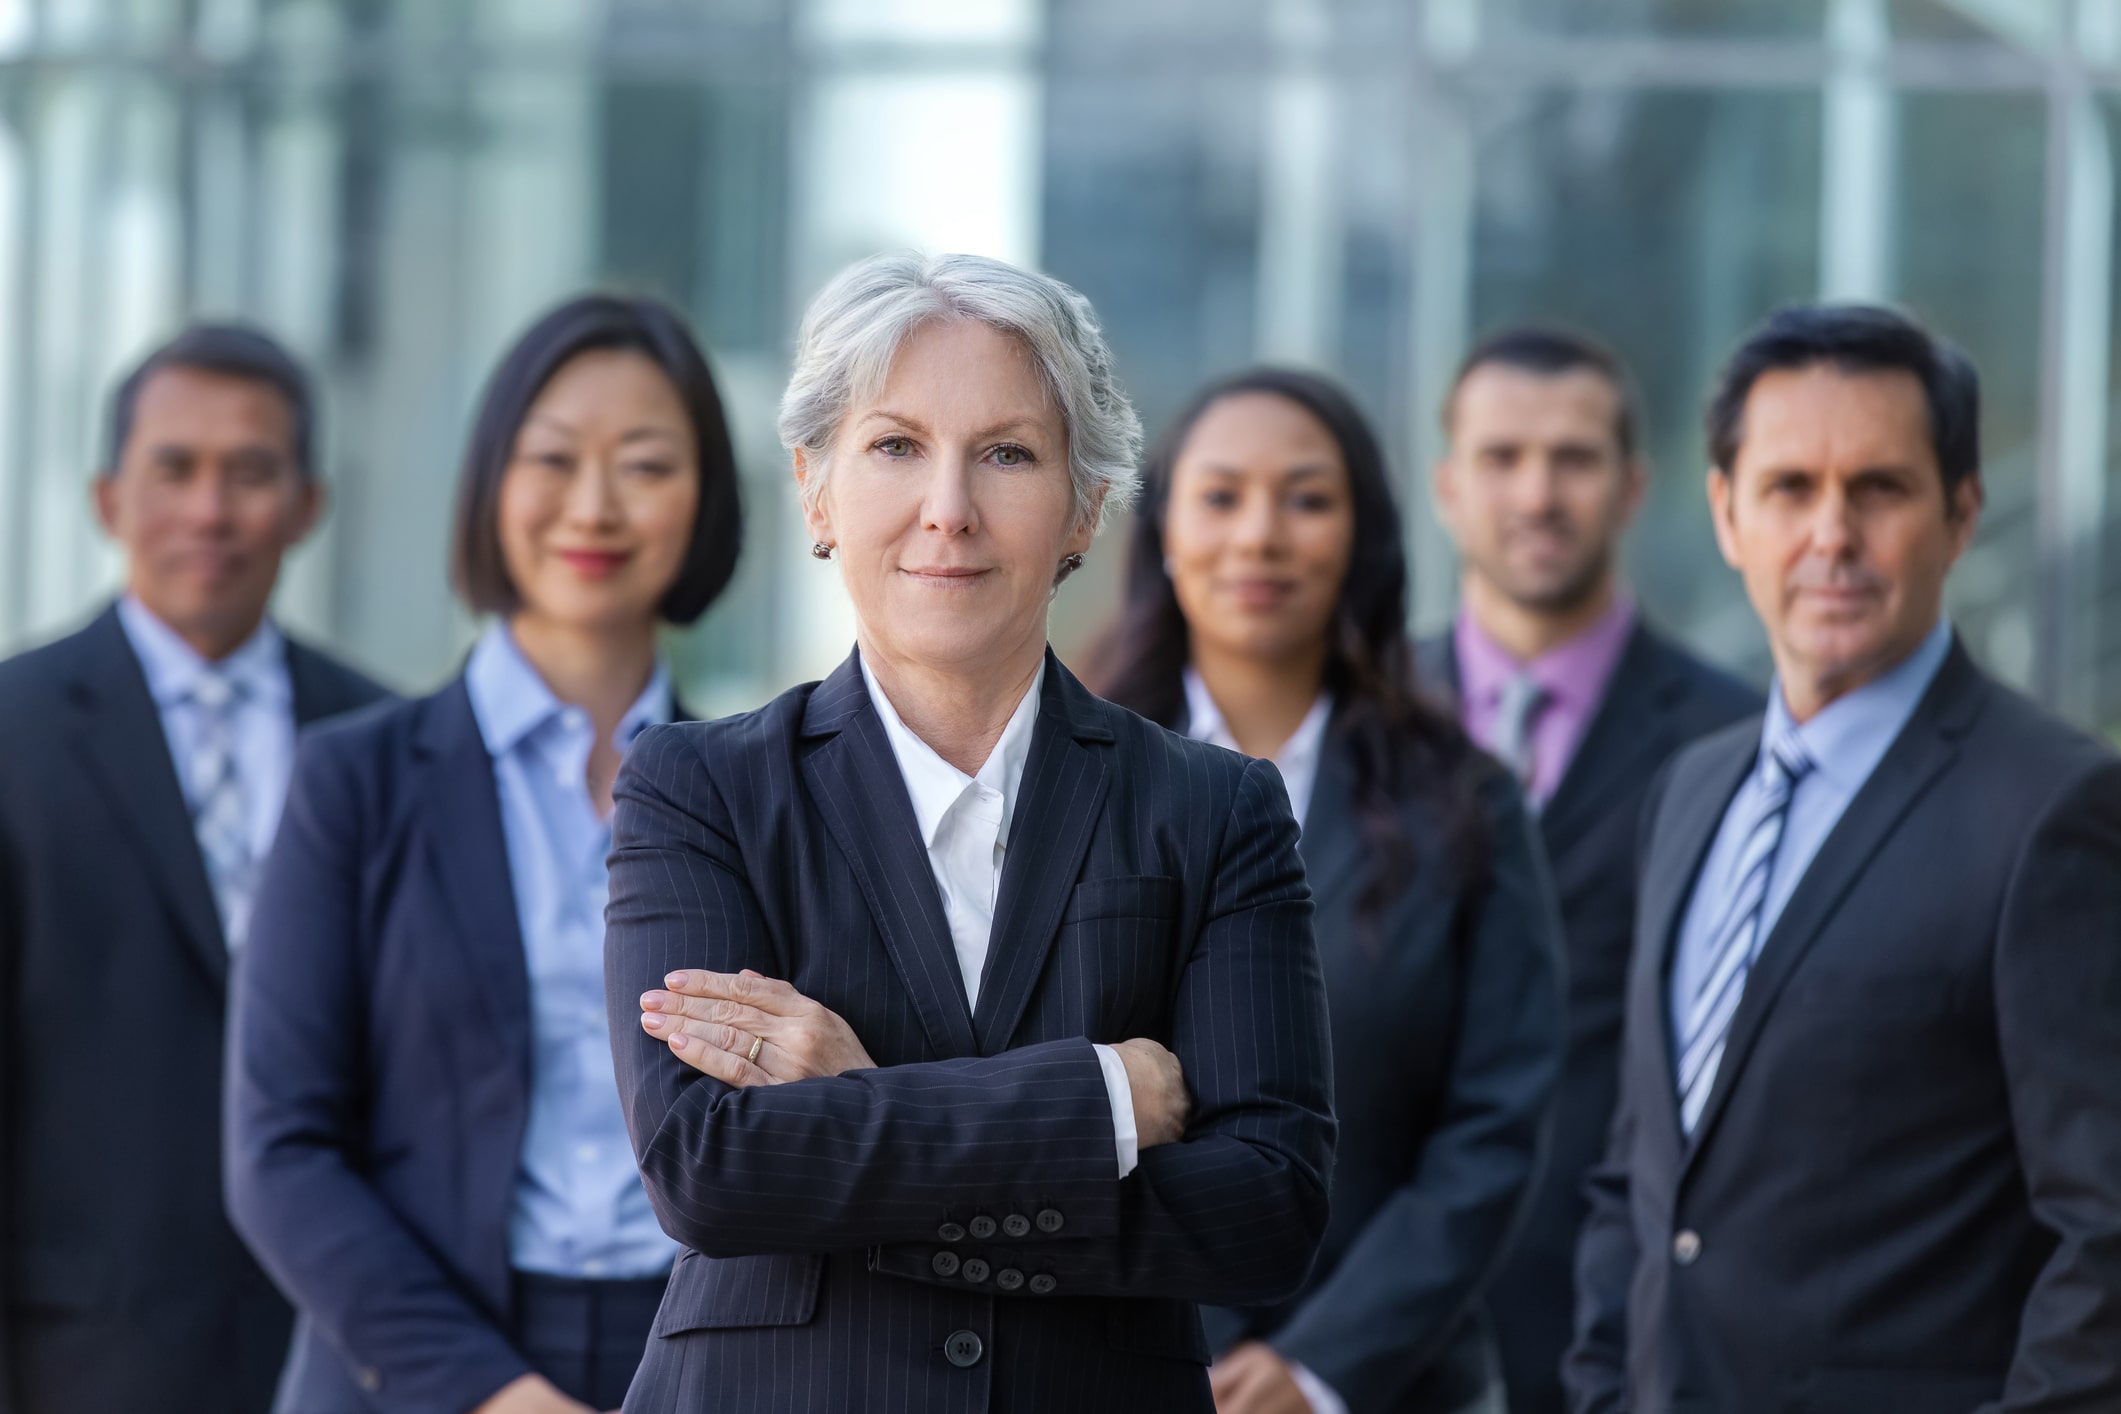 business woman leader stands in front of other coworkers with her arms crossed